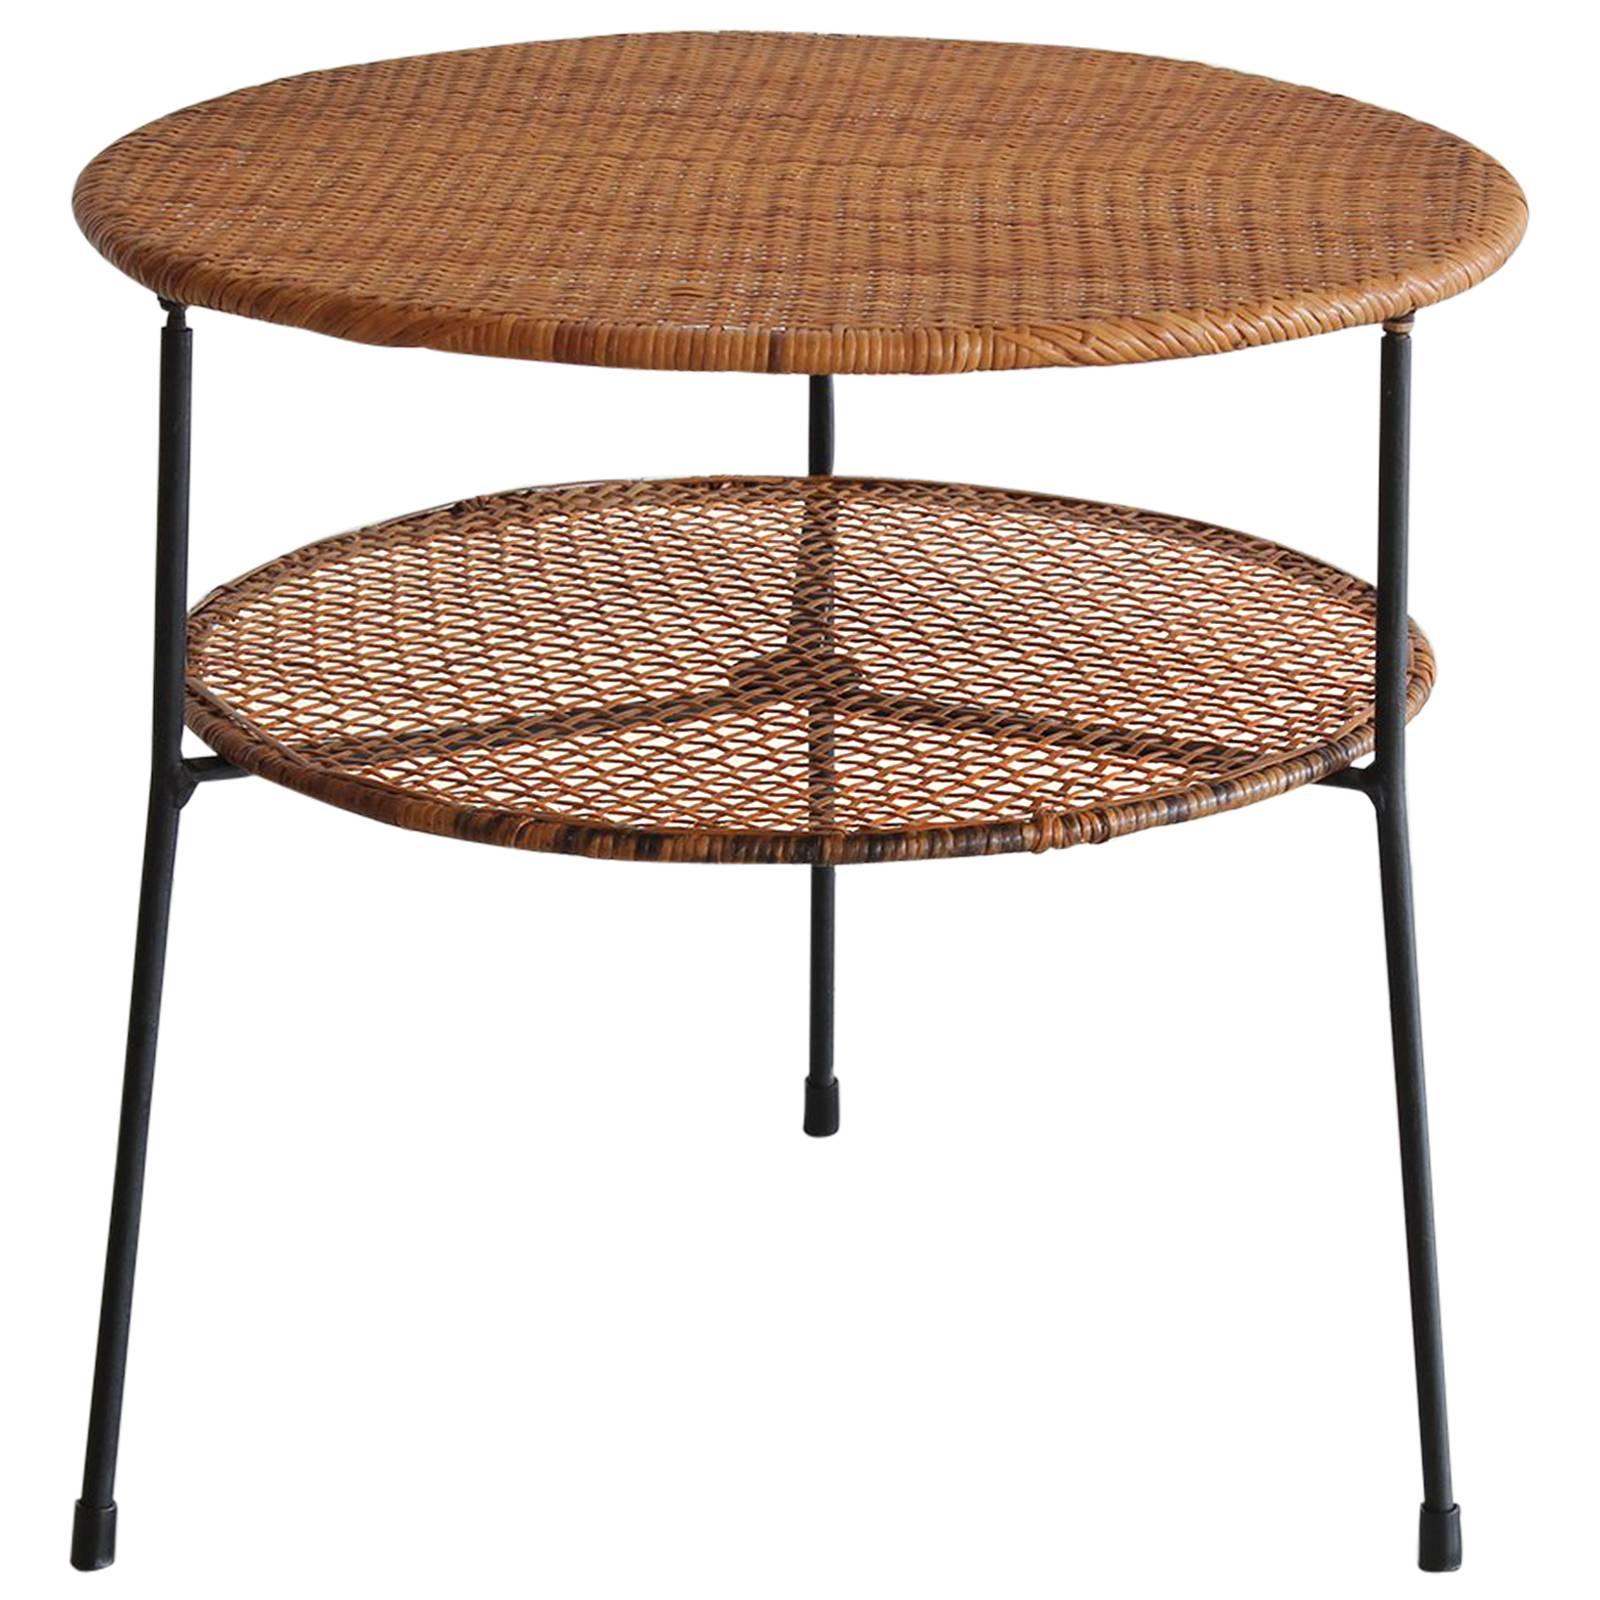 Danny Ho Fong Rattan and Iron Table